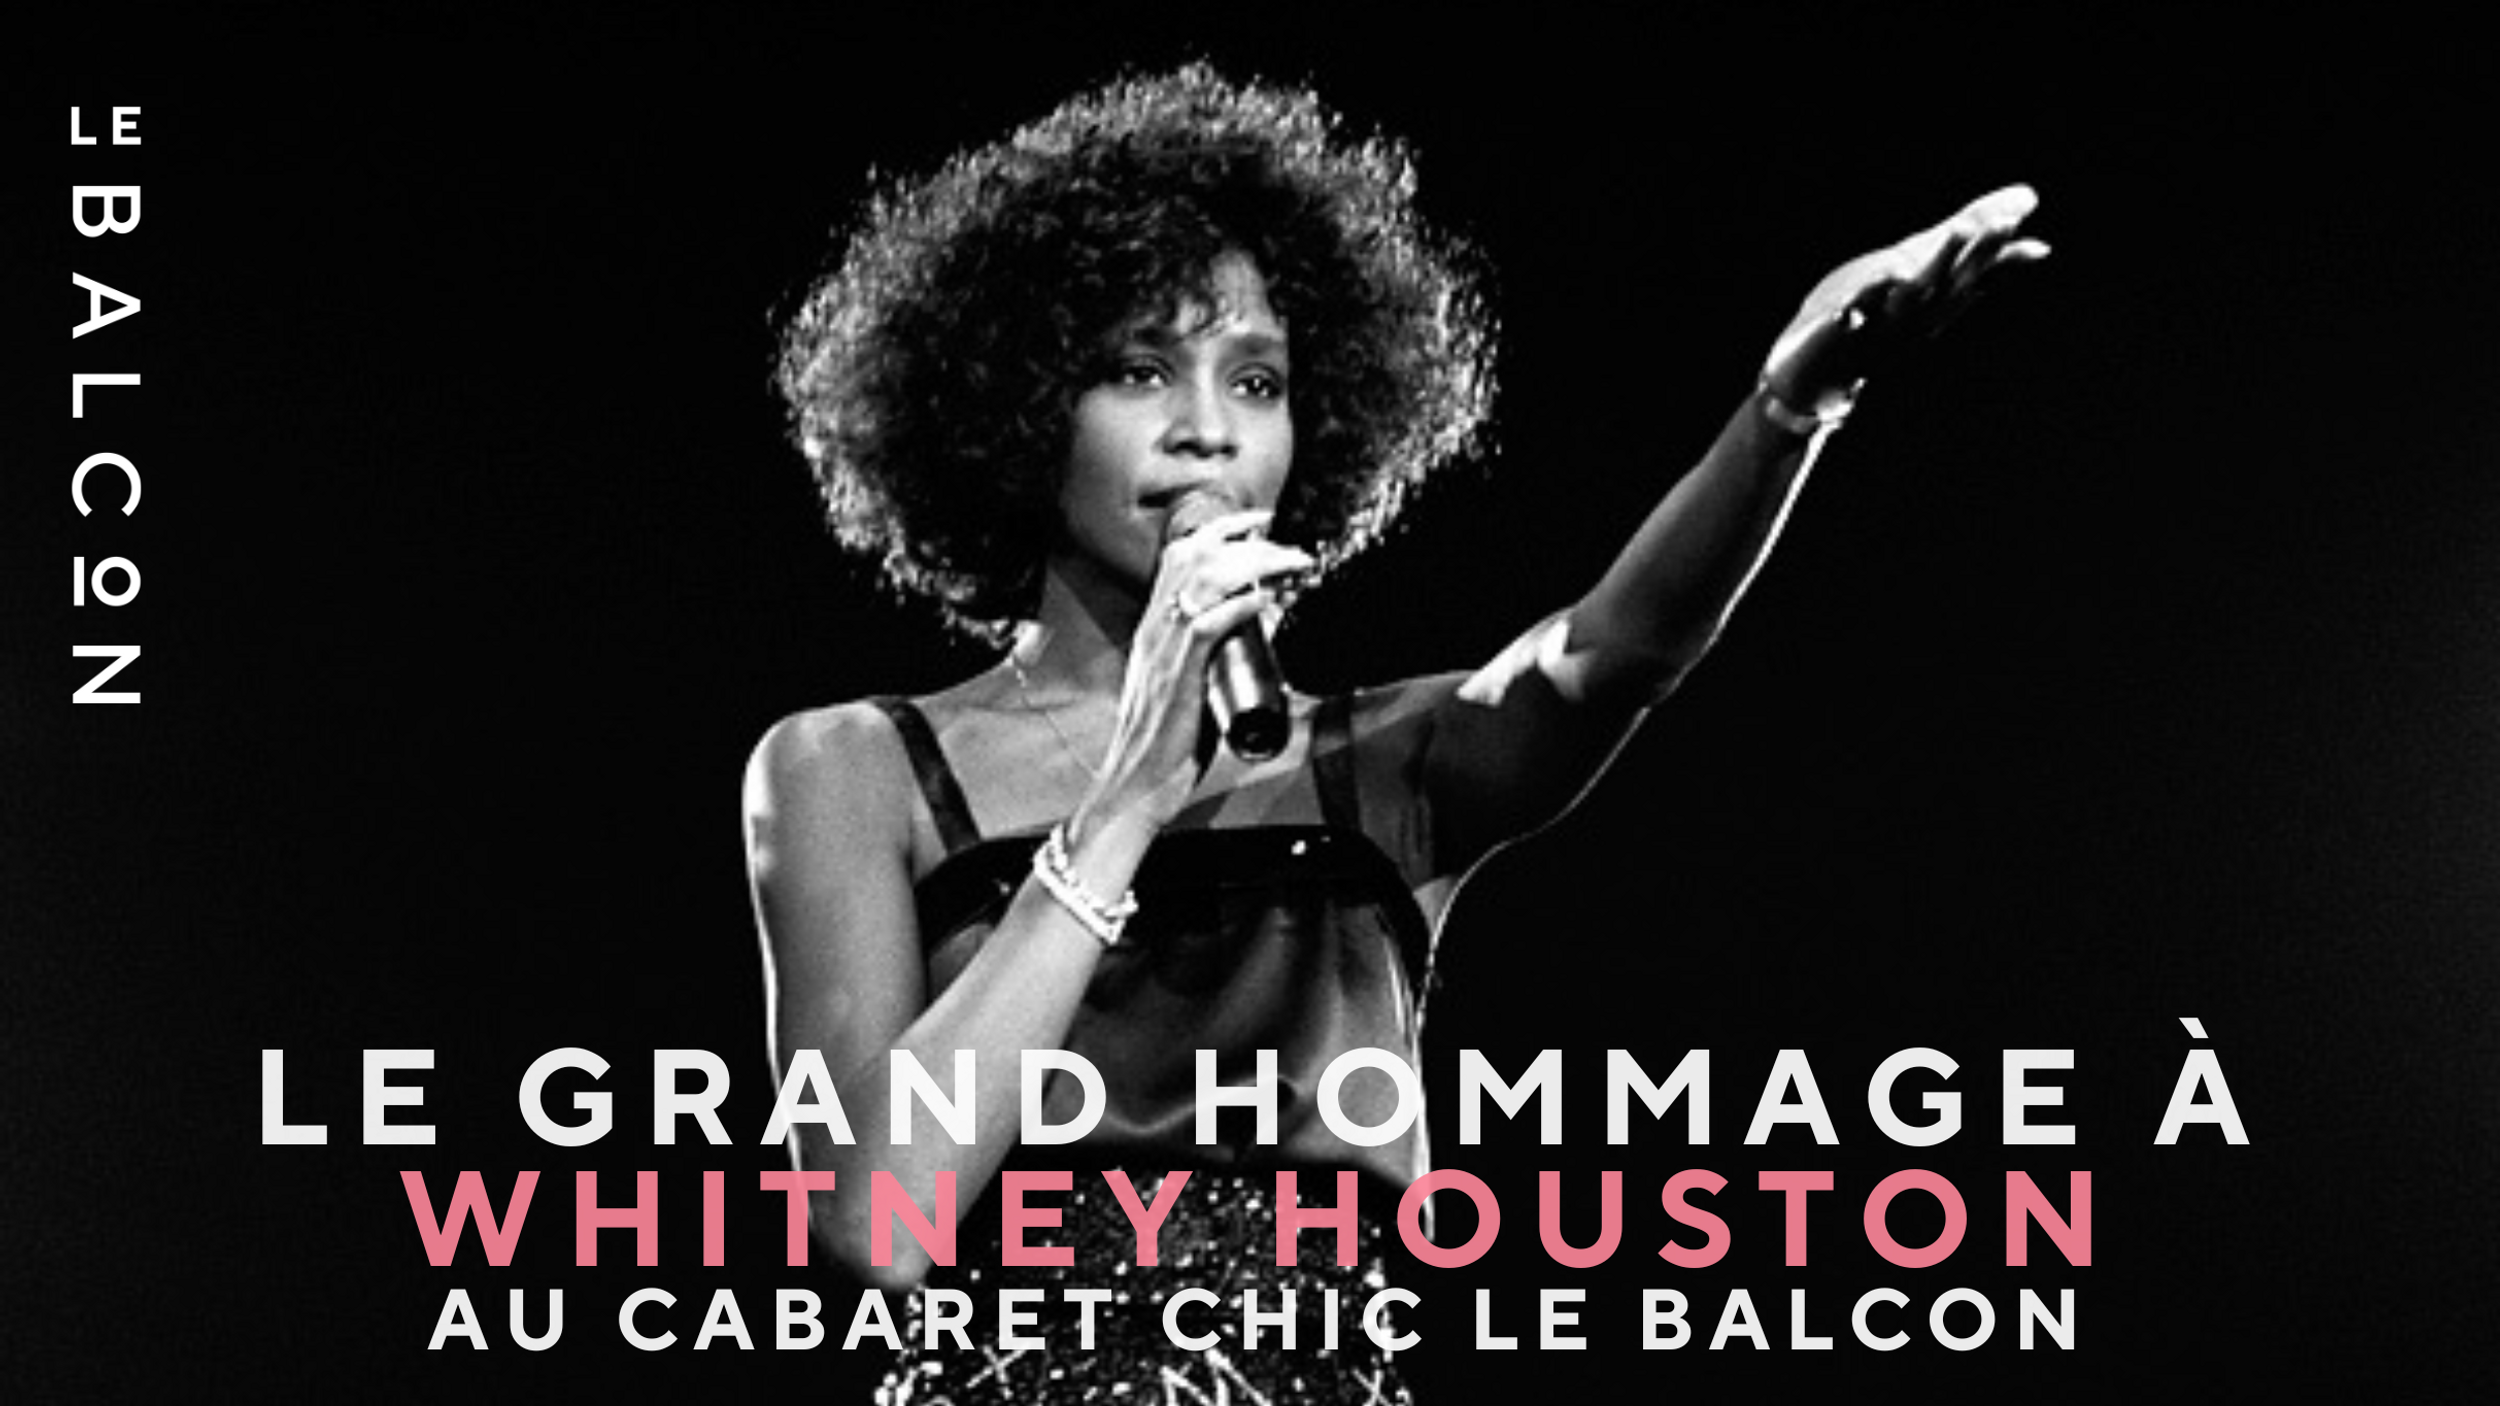 Hommage a Whitney Houston at Le Balcon